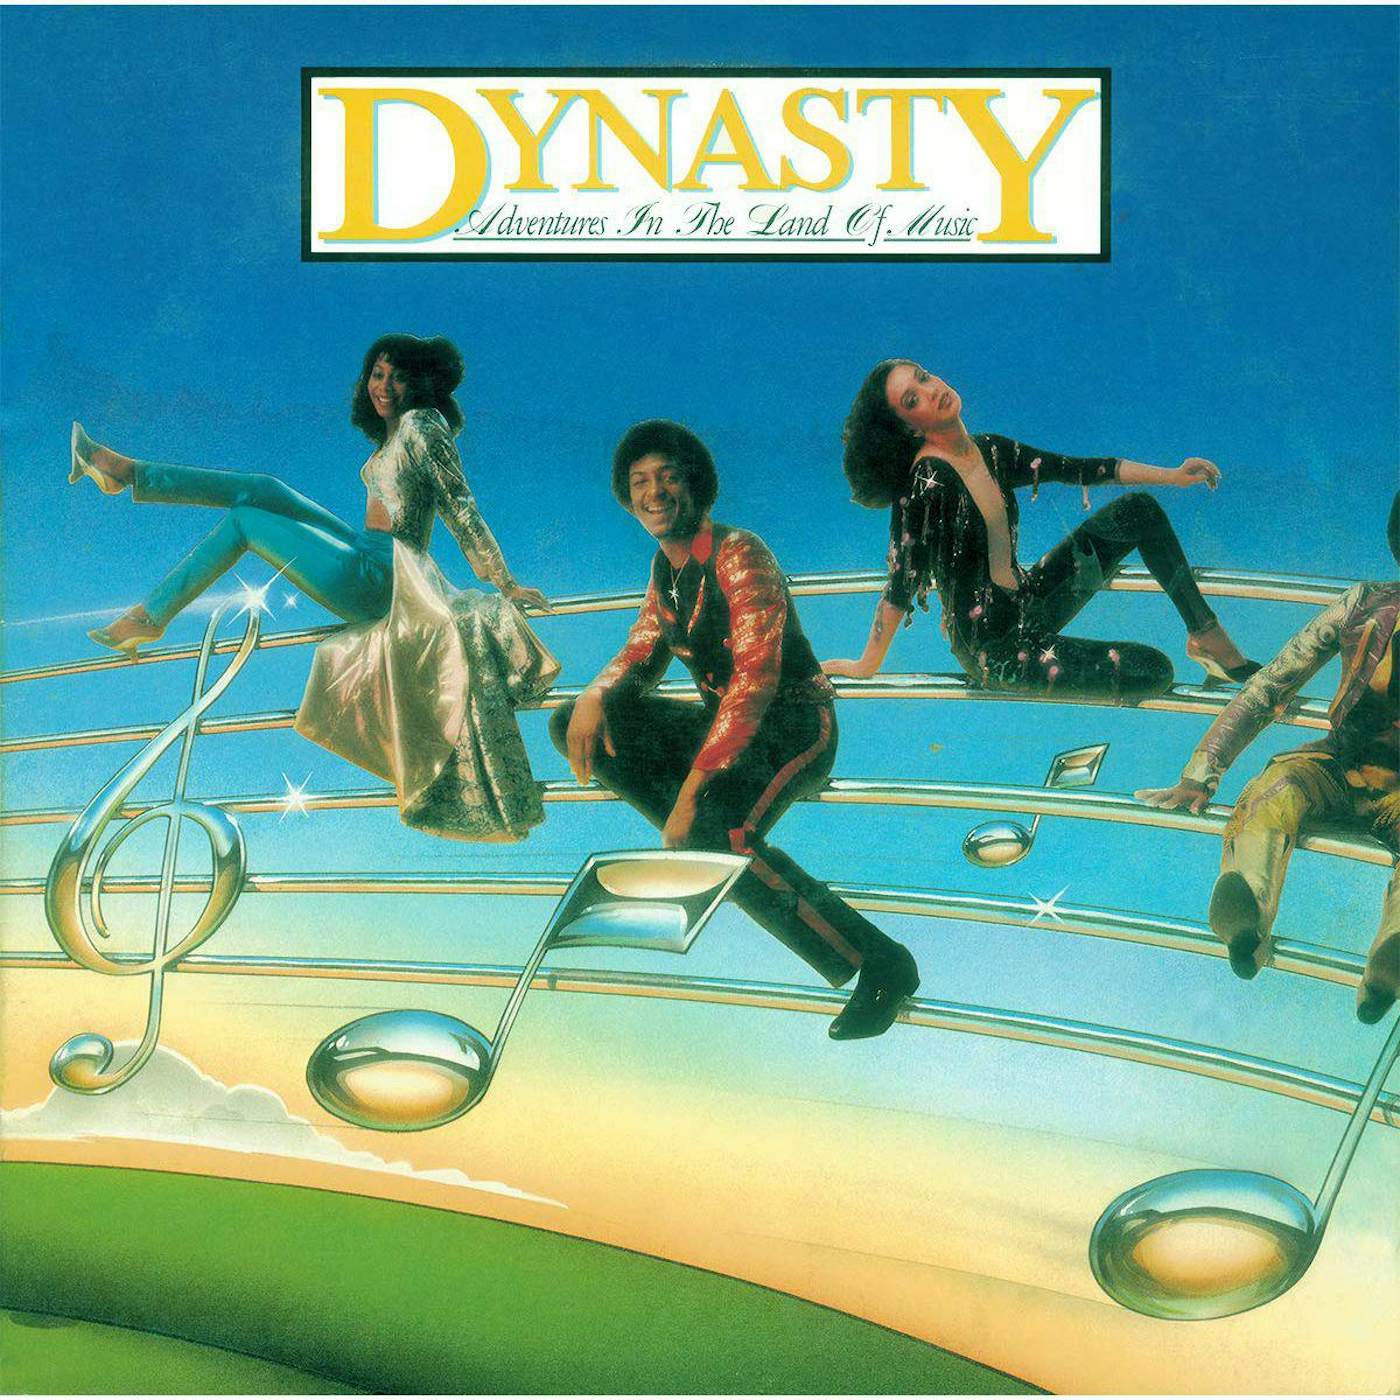 Dynasty ADVENTURES IN LAND OF MUSIC + 2 CD